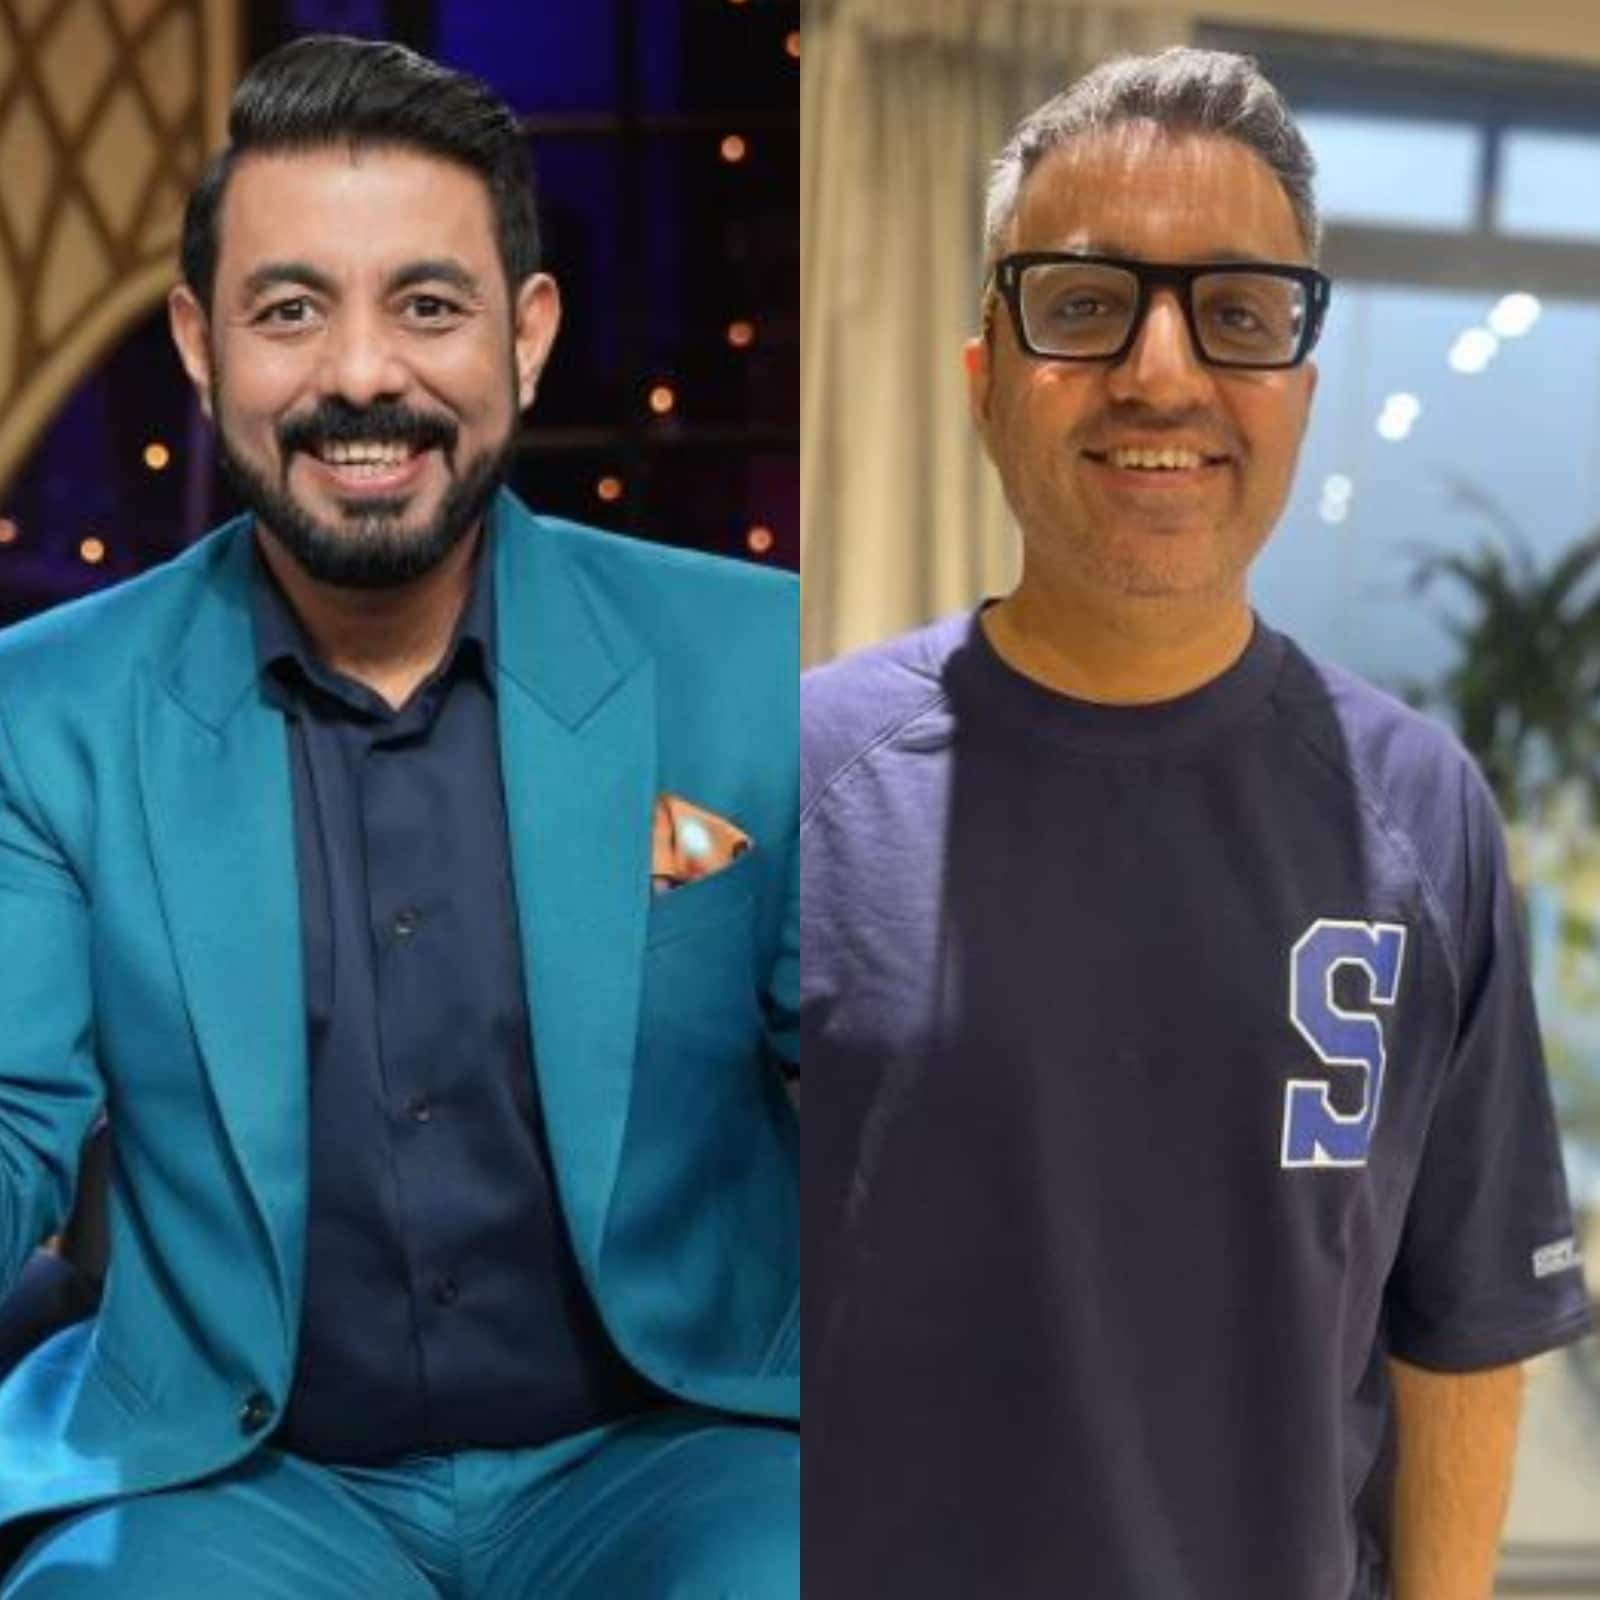 Meet Amit Jain, Shark Tank India season 2's new cast member: the  millionaire entrepreneur replaces Ashneer Grover on the hit reality TV  show, but what was his life like before the fame?